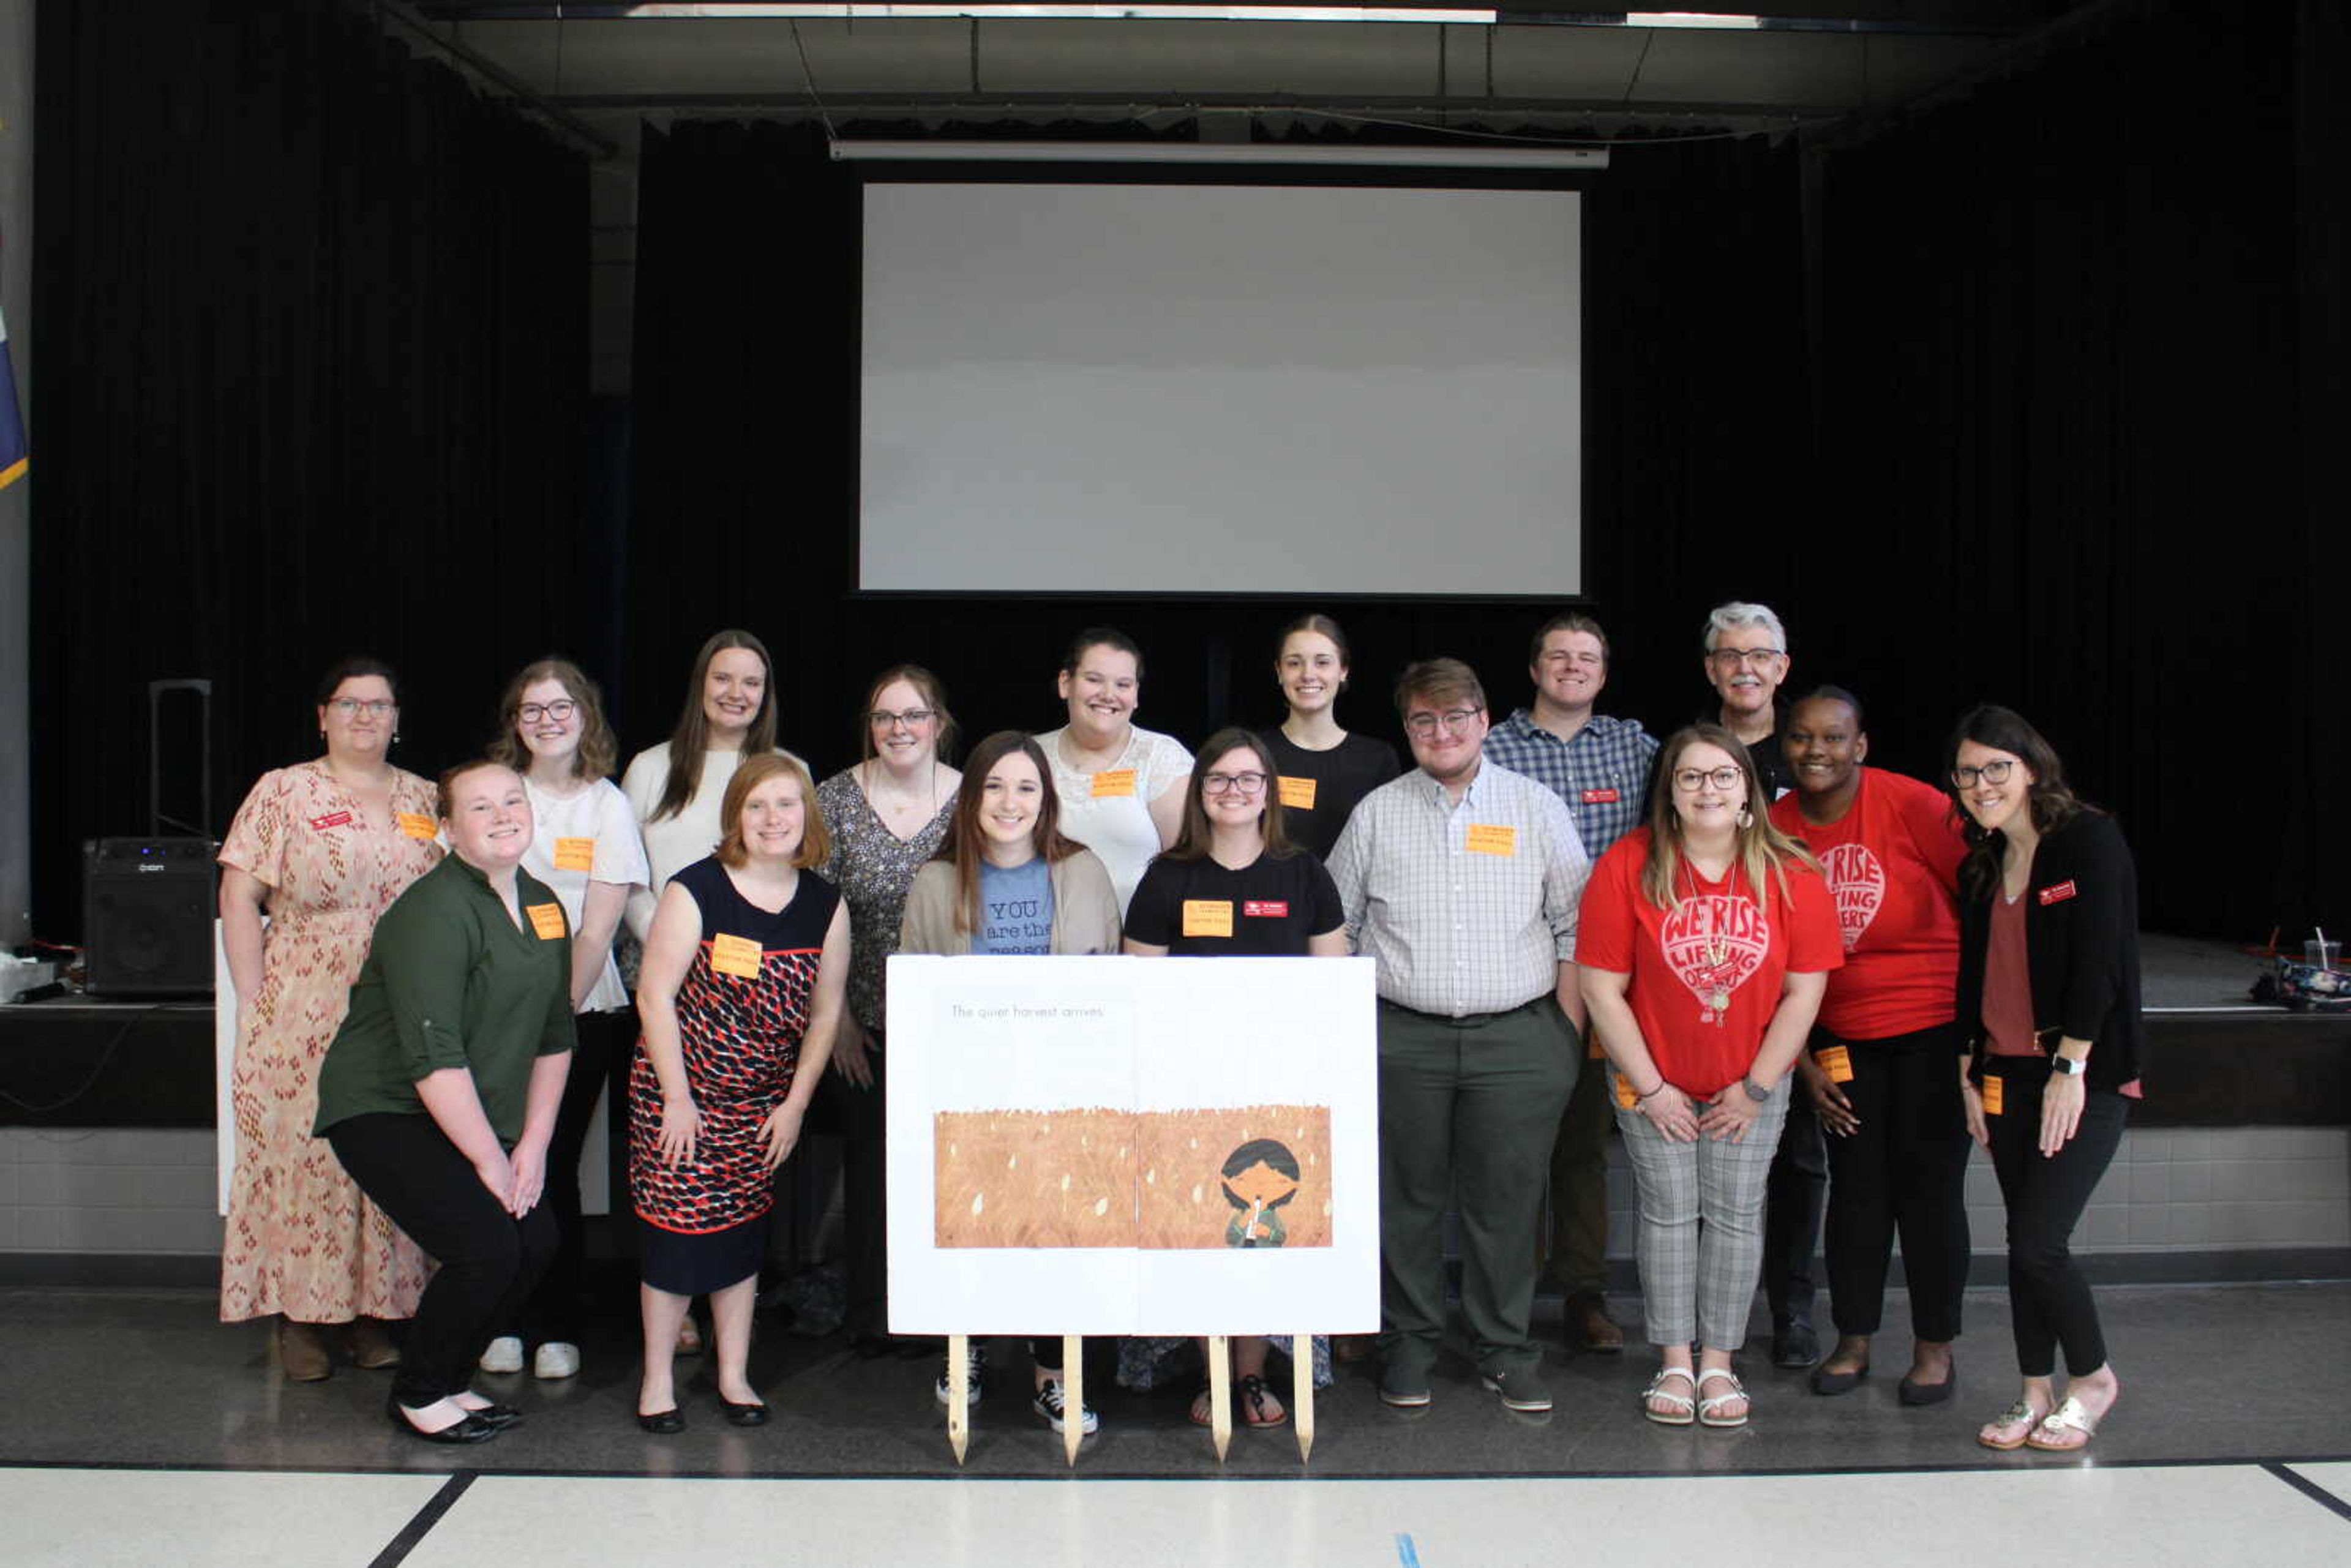 SEMO SMSTA poses for a picture with one of the storybook posters for the literacy walk. SMSTA is a part of Missouri State Teachers Association (MSTA), an organization that helps its members provide a stable learning community for Missouri's children.